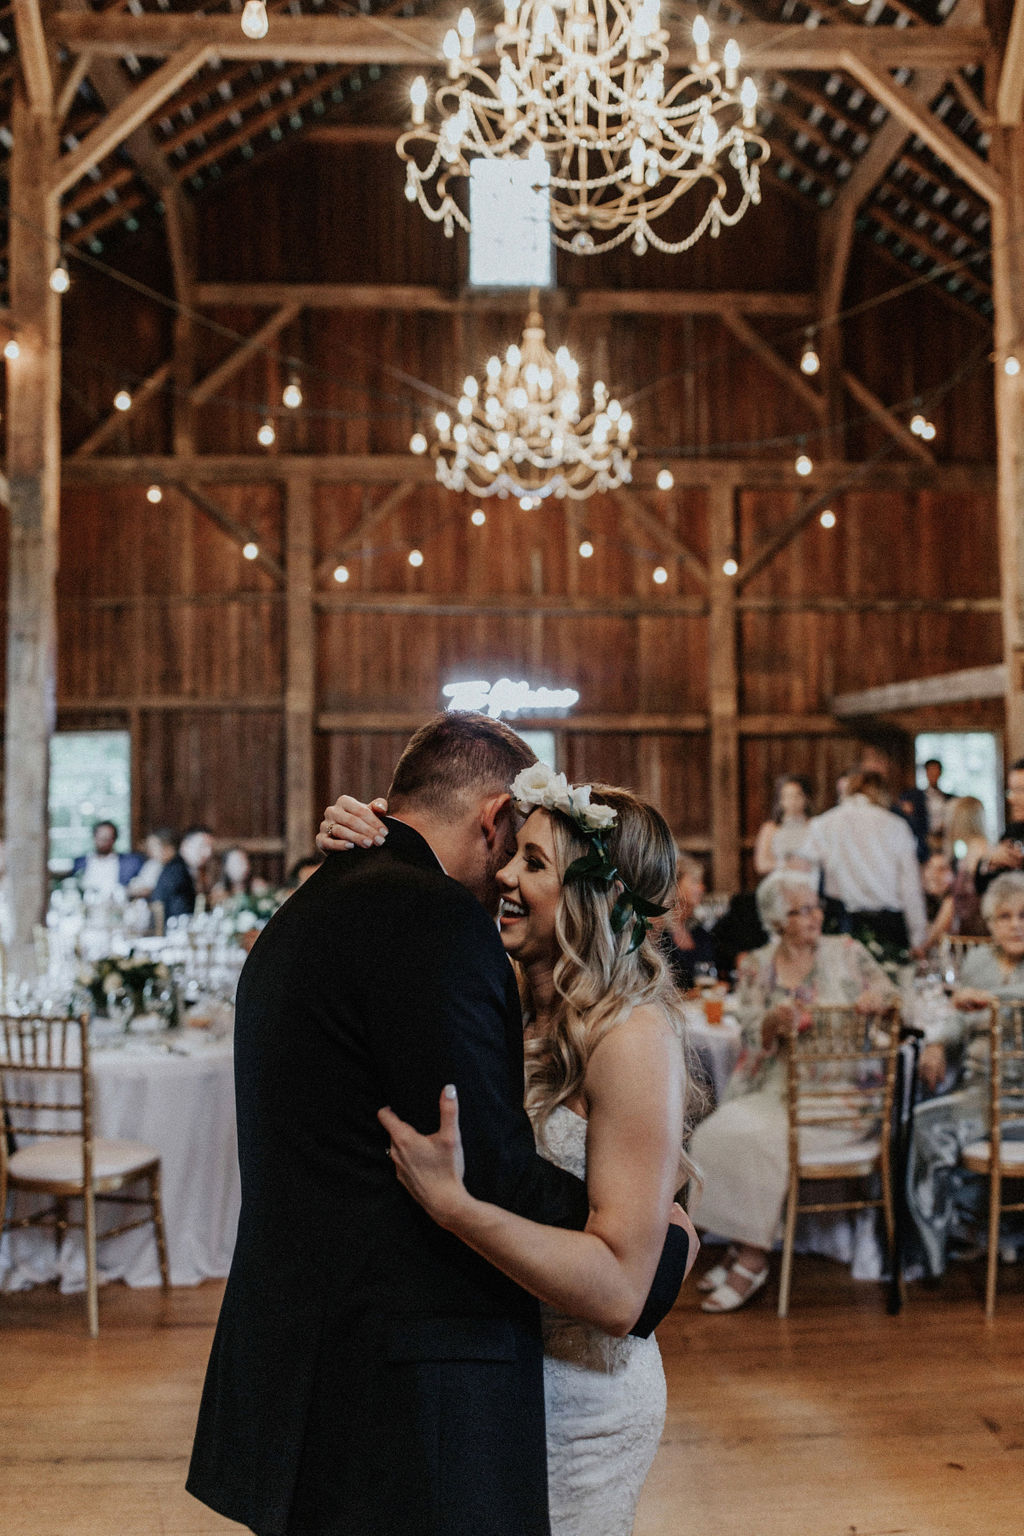 A couple sharing their first dance.